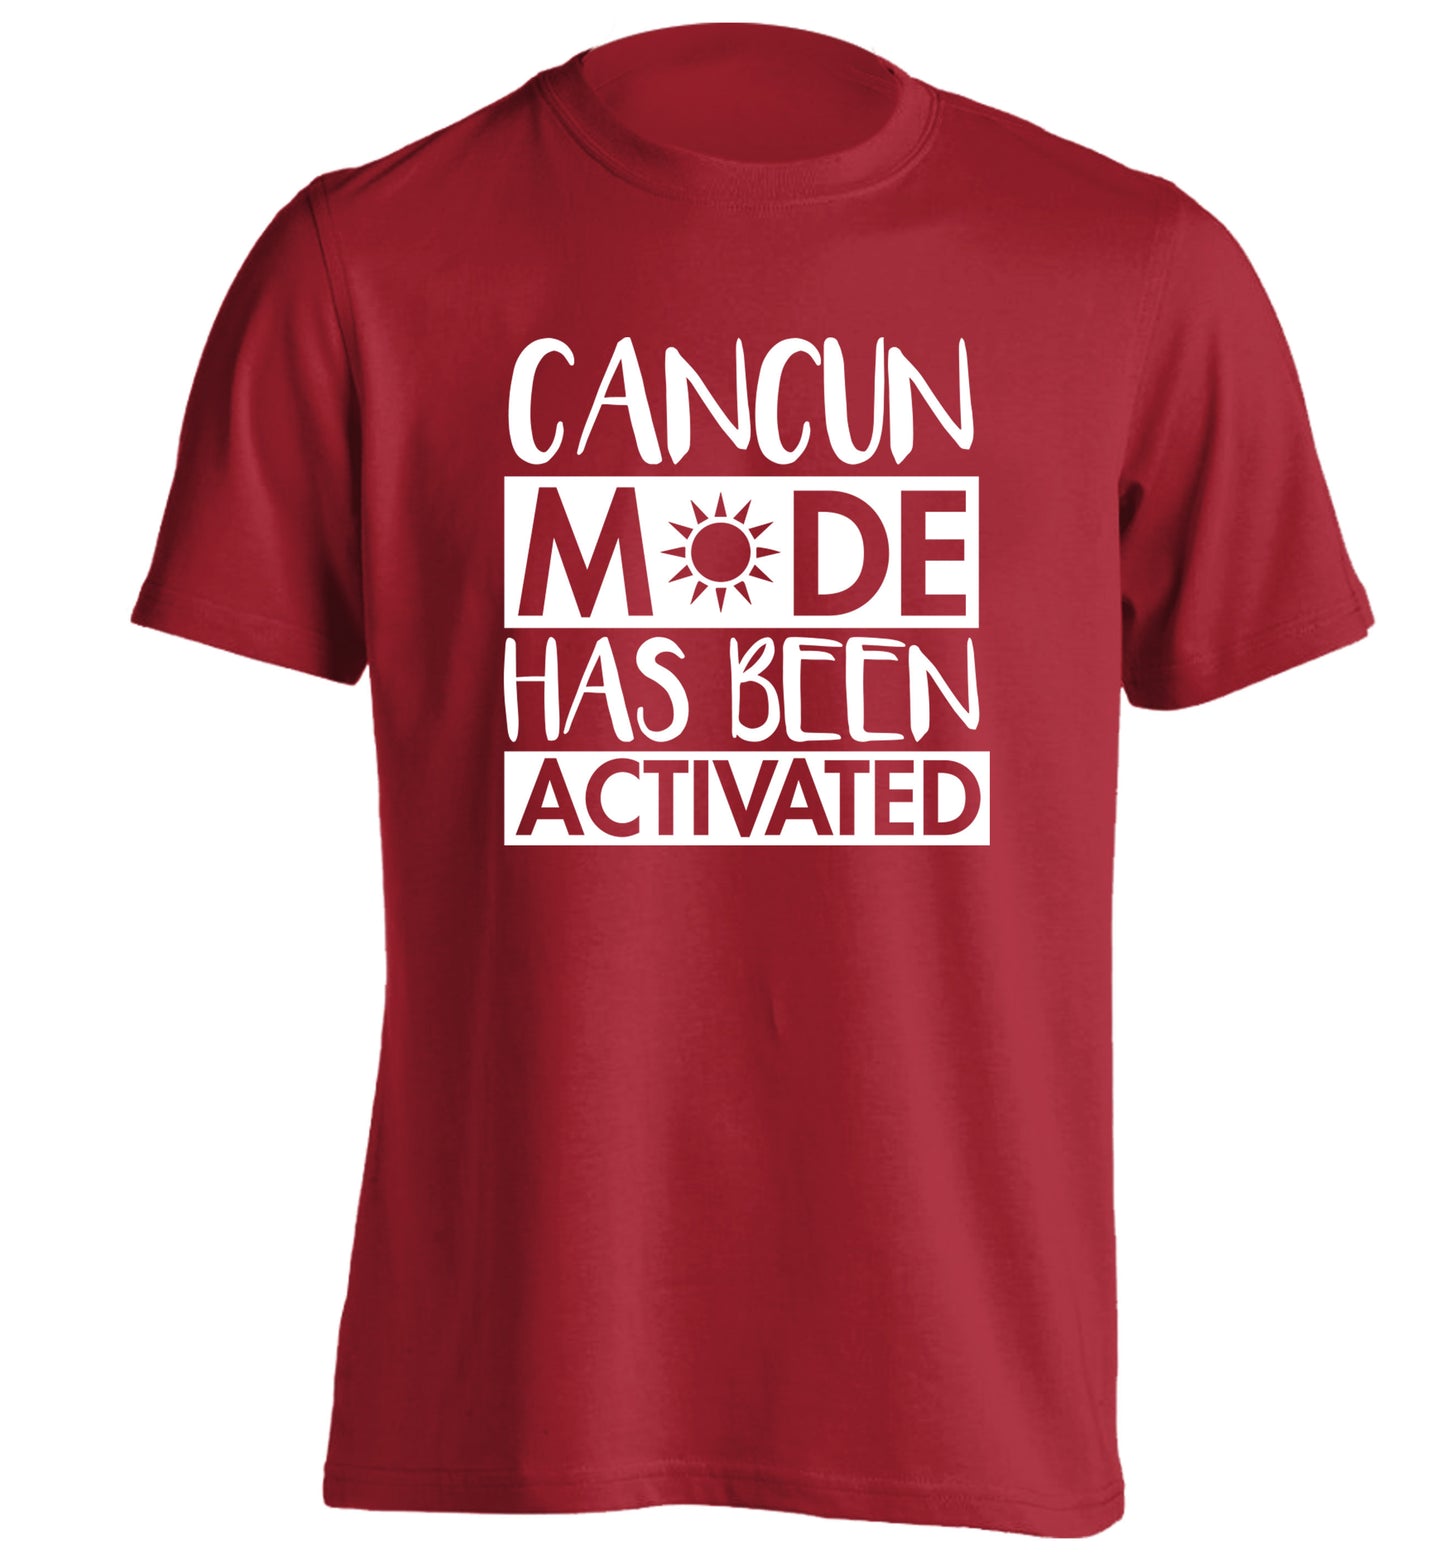 Cancun mode has been activated adults unisex red Tshirt 2XL